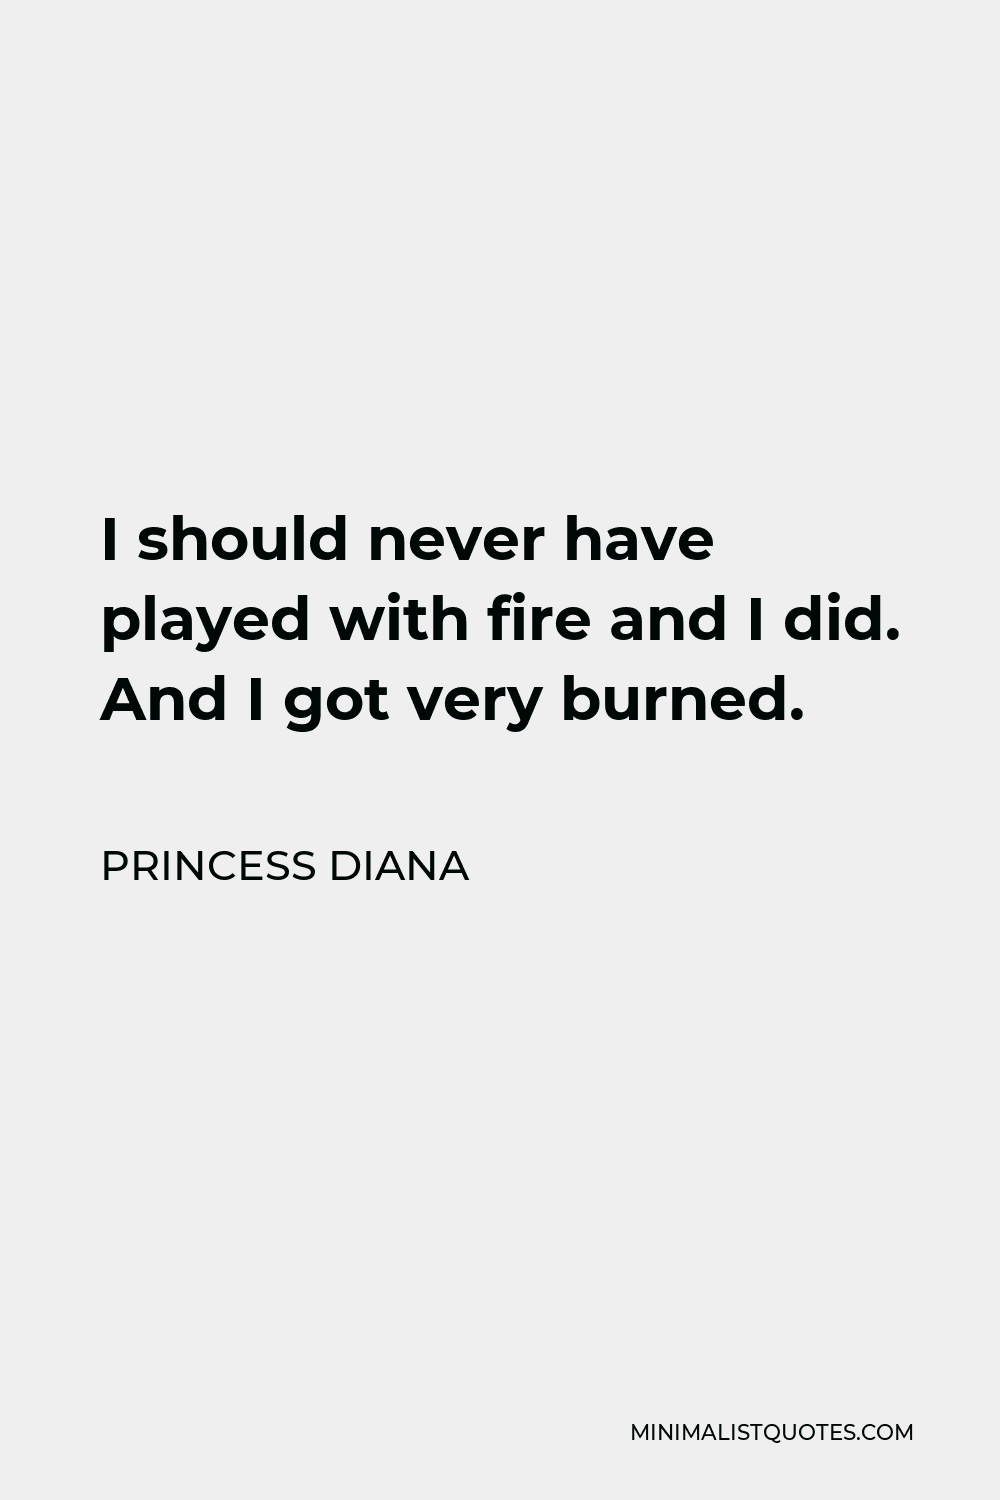 Princess Diana Quote - I should never have played with fire and I did. And I got very burned.